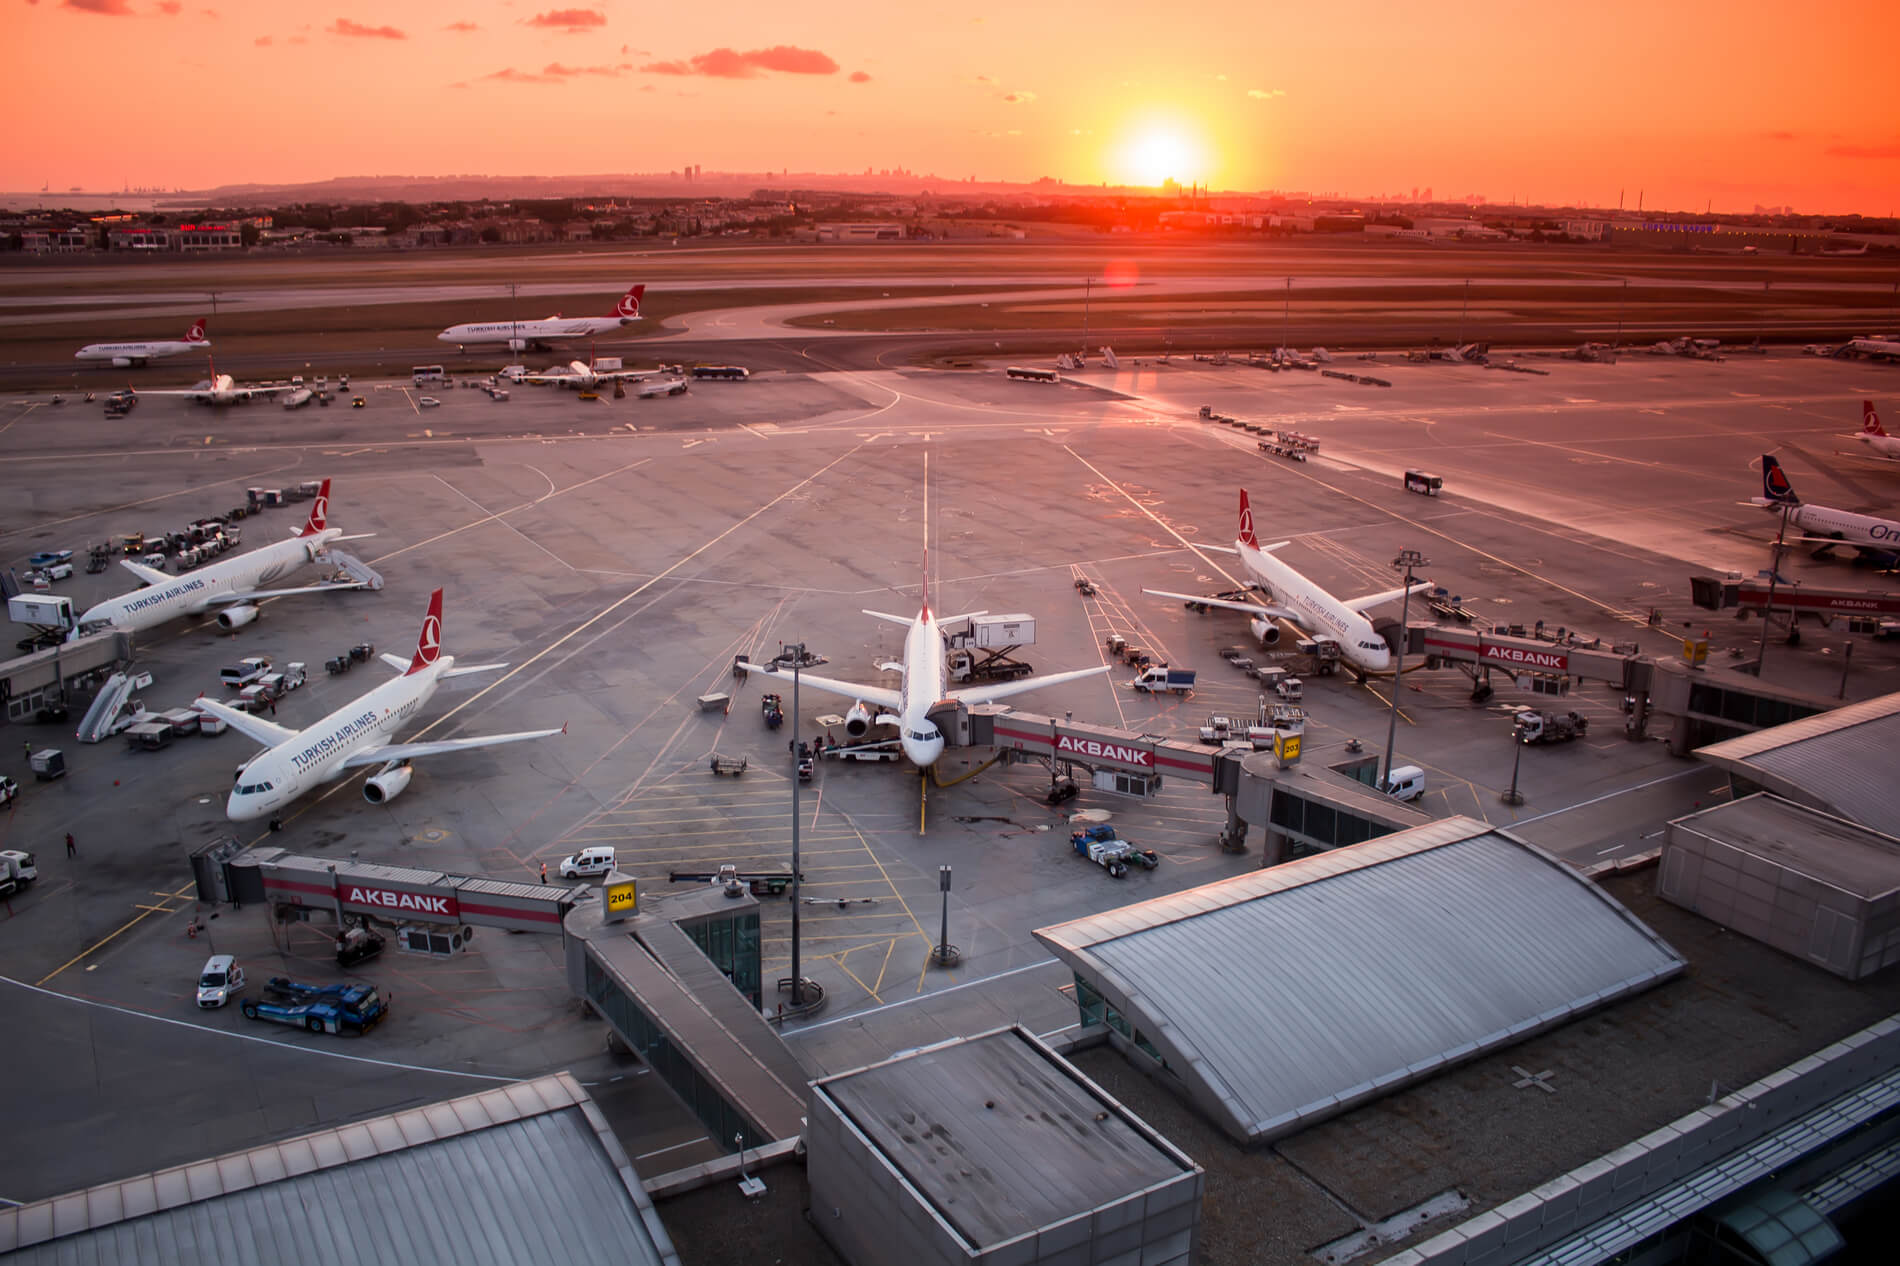 London's Heathrow Airport ended up losing two billion pounds last year